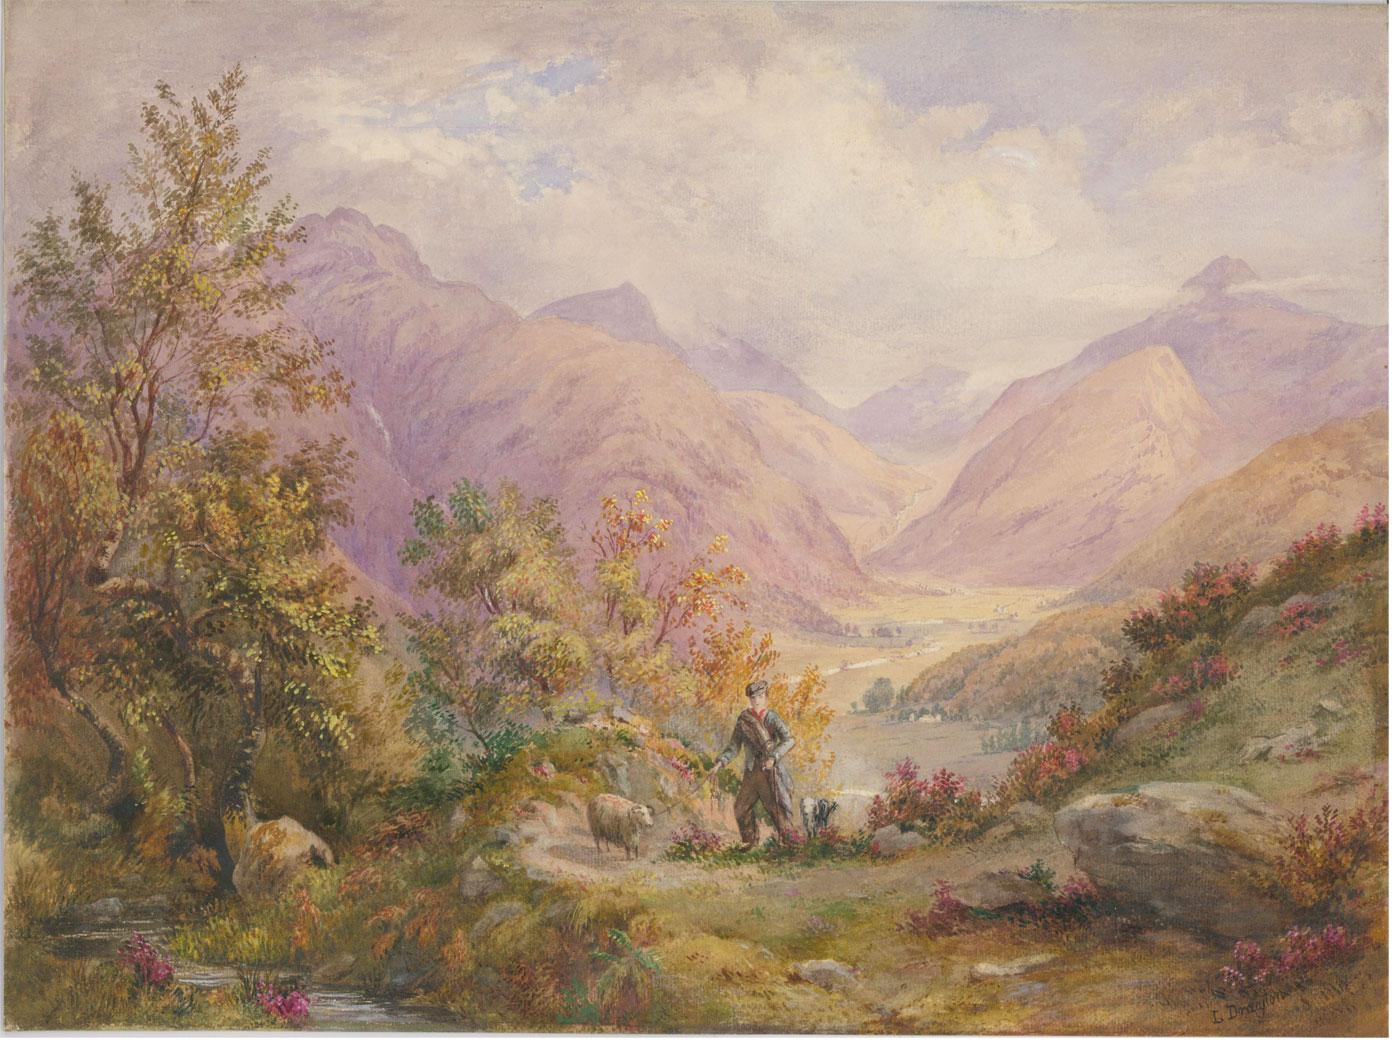 L. Drayton - 19th Century Watercolour, Shepherd in the Scottish Hills - Art by Unknown